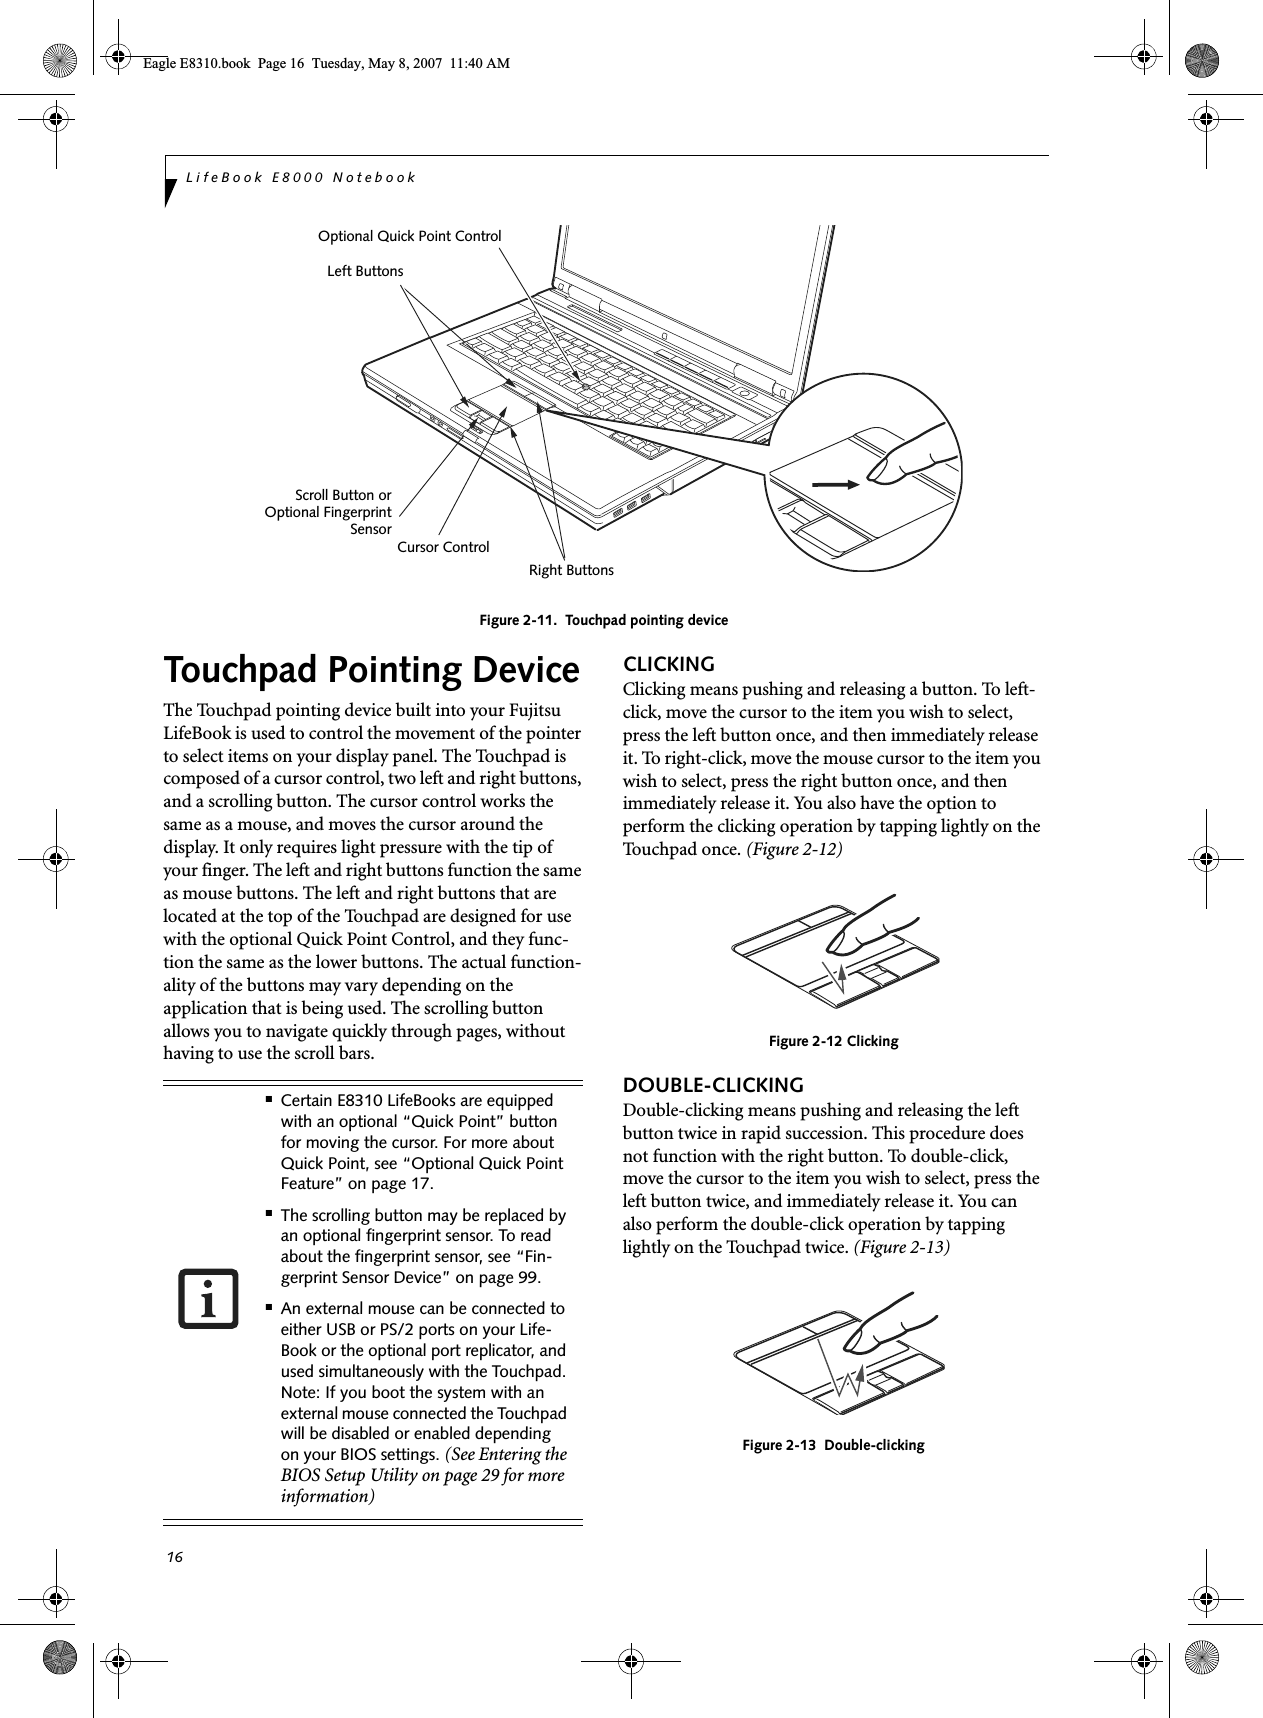 16LifeBook E8000 NotebookFigure 2-11.  Touchpad pointing deviceTouchpad Pointing DeviceThe Touchpad pointing device built into your Fujitsu LifeBook is used to control the movement of the pointer to select items on your display panel. The Touchpad is composed of a cursor control, two left and right buttons, and a scrolling button. The cursor control works the same as a mouse, and moves the cursor around the display. It only requires light pressure with the tip of your finger. The left and right buttons function the same as mouse buttons. The left and right buttons that are located at the top of the Touchpad are designed for use with the optional Quick Point Control, and they func-tion the same as the lower buttons. The actual function-ality of the buttons may vary depending on the application that is being used. The scrolling button allows you to navigate quickly through pages, without having to use the scroll bars.CLICKINGClicking means pushing and releasing a button. To left-click, move the cursor to the item you wish to select, press the left button once, and then immediately release it. To right-click, move the mouse cursor to the item you wish to select, press the right button once, and then immediately release it. You also have the option to perform the clicking operation by tapping lightly on the Touchpad once. (Figure 2-12)Figure 2-12 ClickingDOUBLE-CLICKINGDouble-clicking means pushing and releasing the left button twice in rapid succession. This procedure does not function with the right button. To double-click, move the cursor to the item you wish to select, press the left button twice, and immediately release it. You can also perform the double-click operation by tapping lightly on the Touchpad twice. (Figure 2-13)Figure 2-13  Double-clickingCursor ControlLeft ButtonsRight ButtonsScroll Button orOptional Quick Point ControlOptional FingerprintSensor■Certain E8310 LifeBooks are equipped with an optional “Quick Point” button for moving the cursor. For more about Quick Point, see “Optional Quick Point Feature” on page 17.■The scrolling button may be replaced by an optional fingerprint sensor. To read about the fingerprint sensor, see “Fin-gerprint Sensor Device” on page 99.■An external mouse can be connected to either USB or PS/2 ports on your Life-Book or the optional port replicator, and used simultaneously with the Touchpad. Note: If you boot the system with an external mouse connected the Touchpad will be disabled or enabled depending on your BIOS settings. (See Entering the BIOS Setup Utility on page 29 for more information)Eagle E8310.book  Page 16  Tuesday, May 8, 2007  11:40 AM